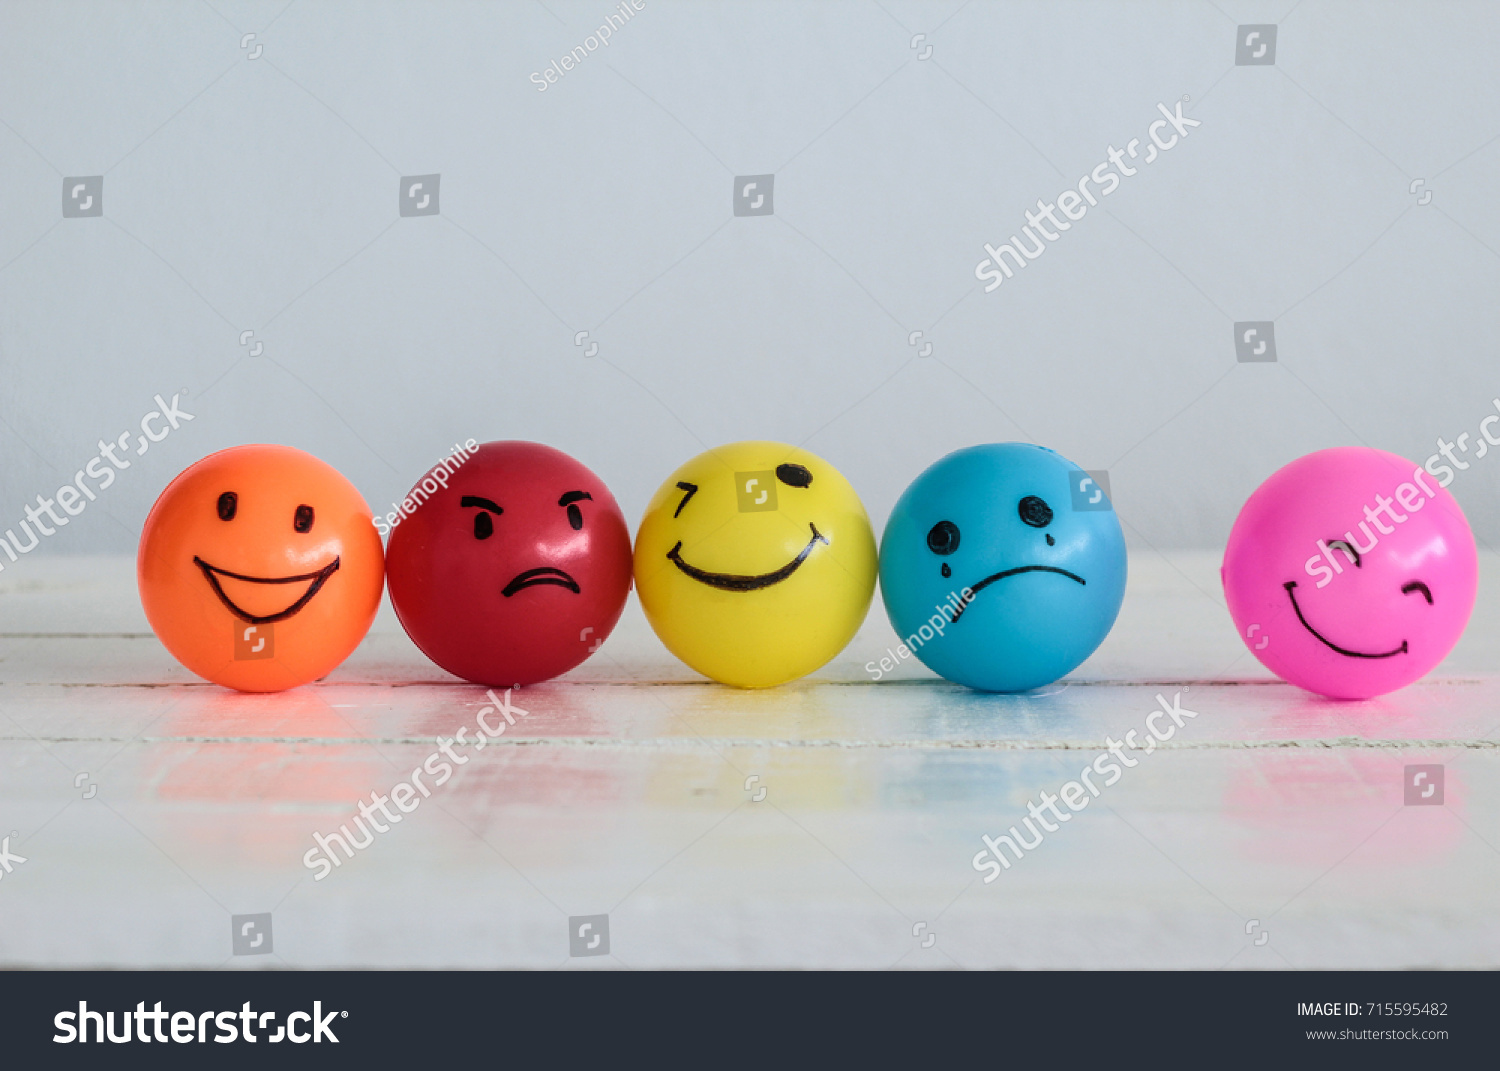 Emotions balls background, Happy Smiley faces ball in yellow , orange and pink. Sadness ball in blue and madness ball in red. Self made hand draw balls. #715595482